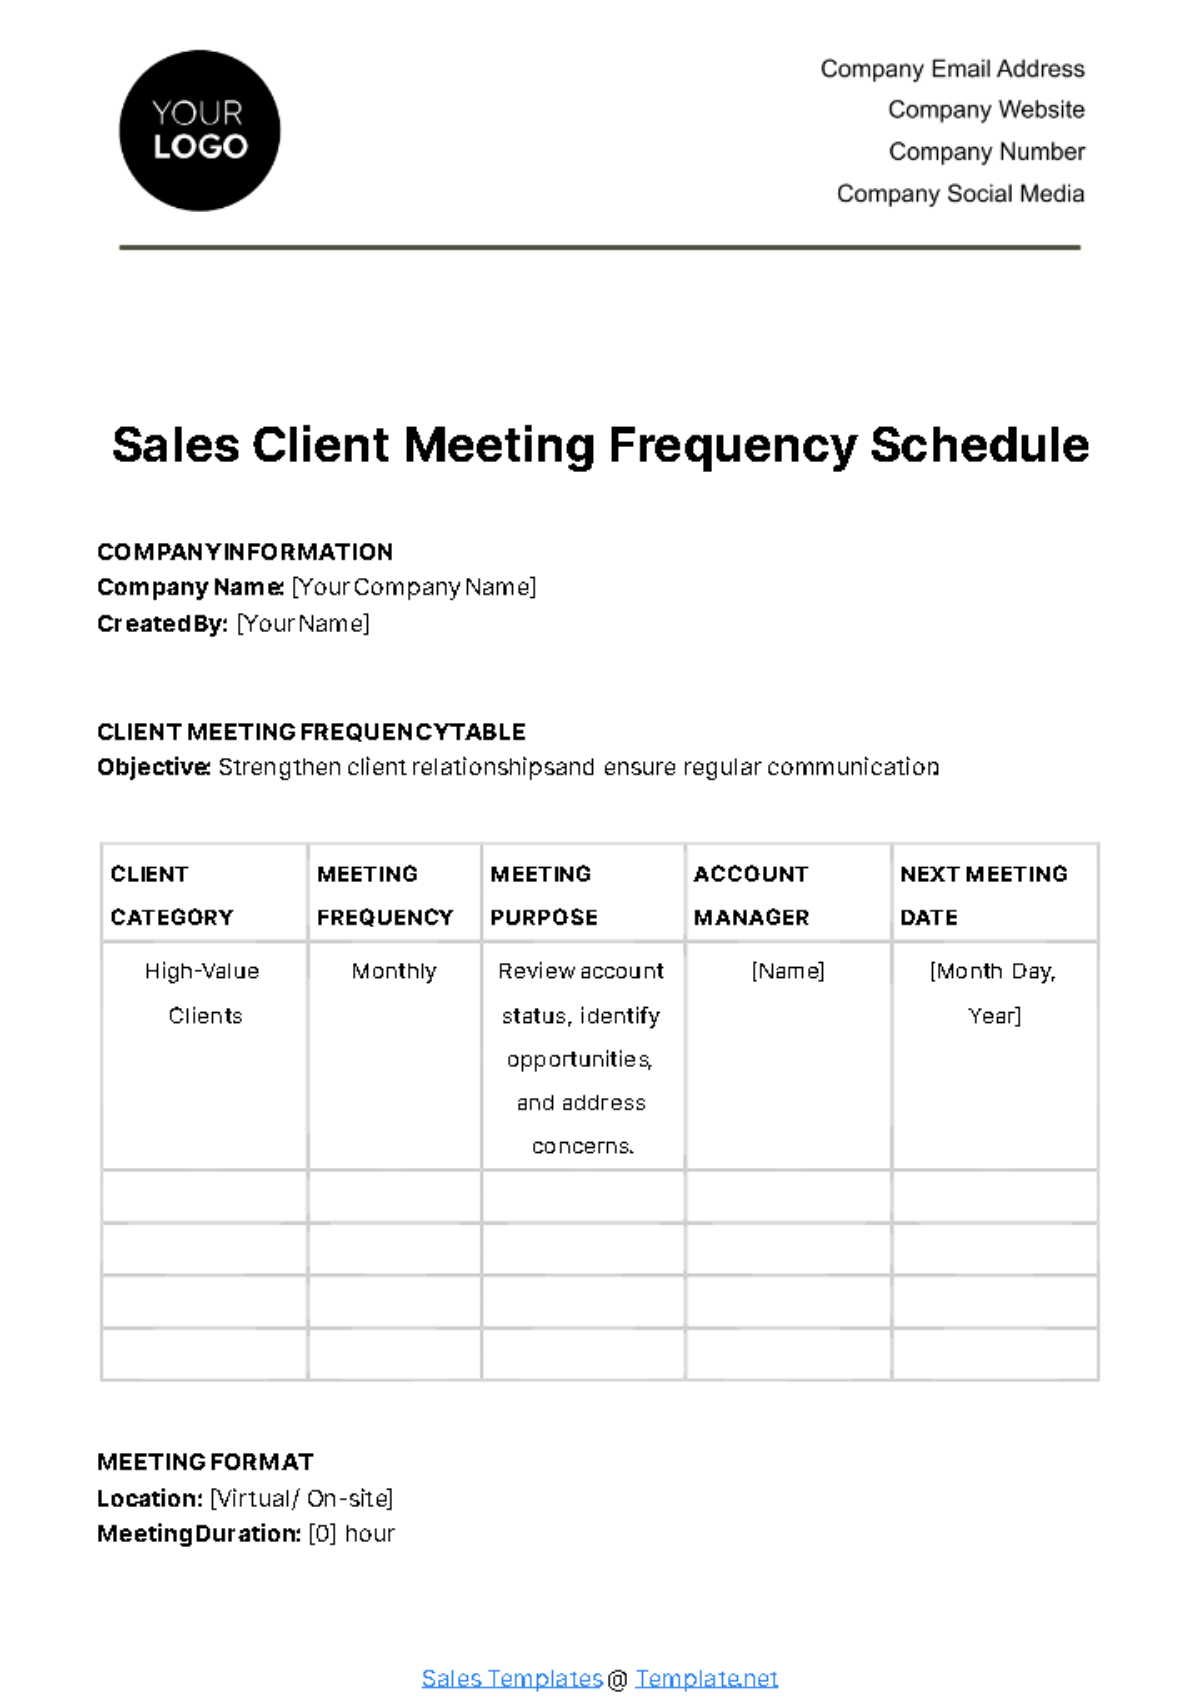 Free Sales Client Meeting Frequency Schedule Template